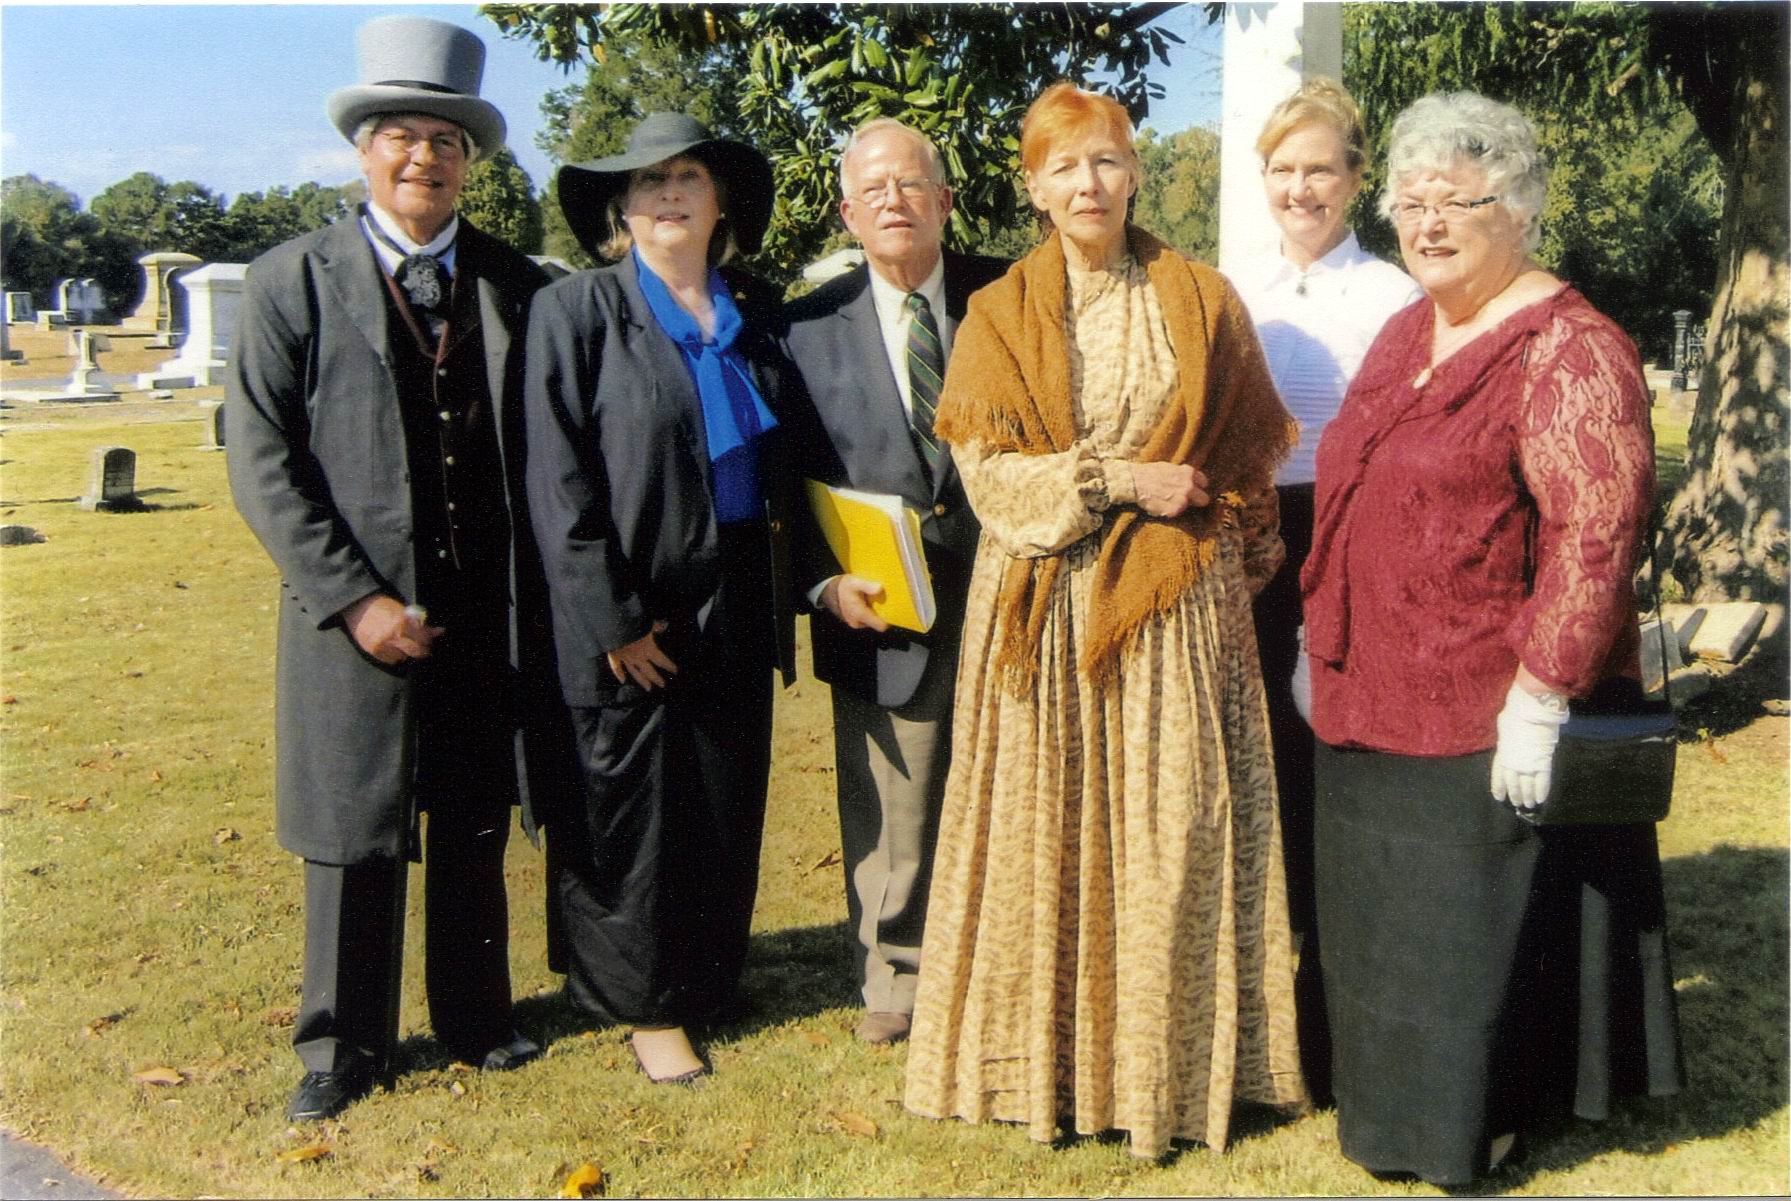 Costumed interpreters lead a tour of Northview Cemetery in Hartwell, Georgia